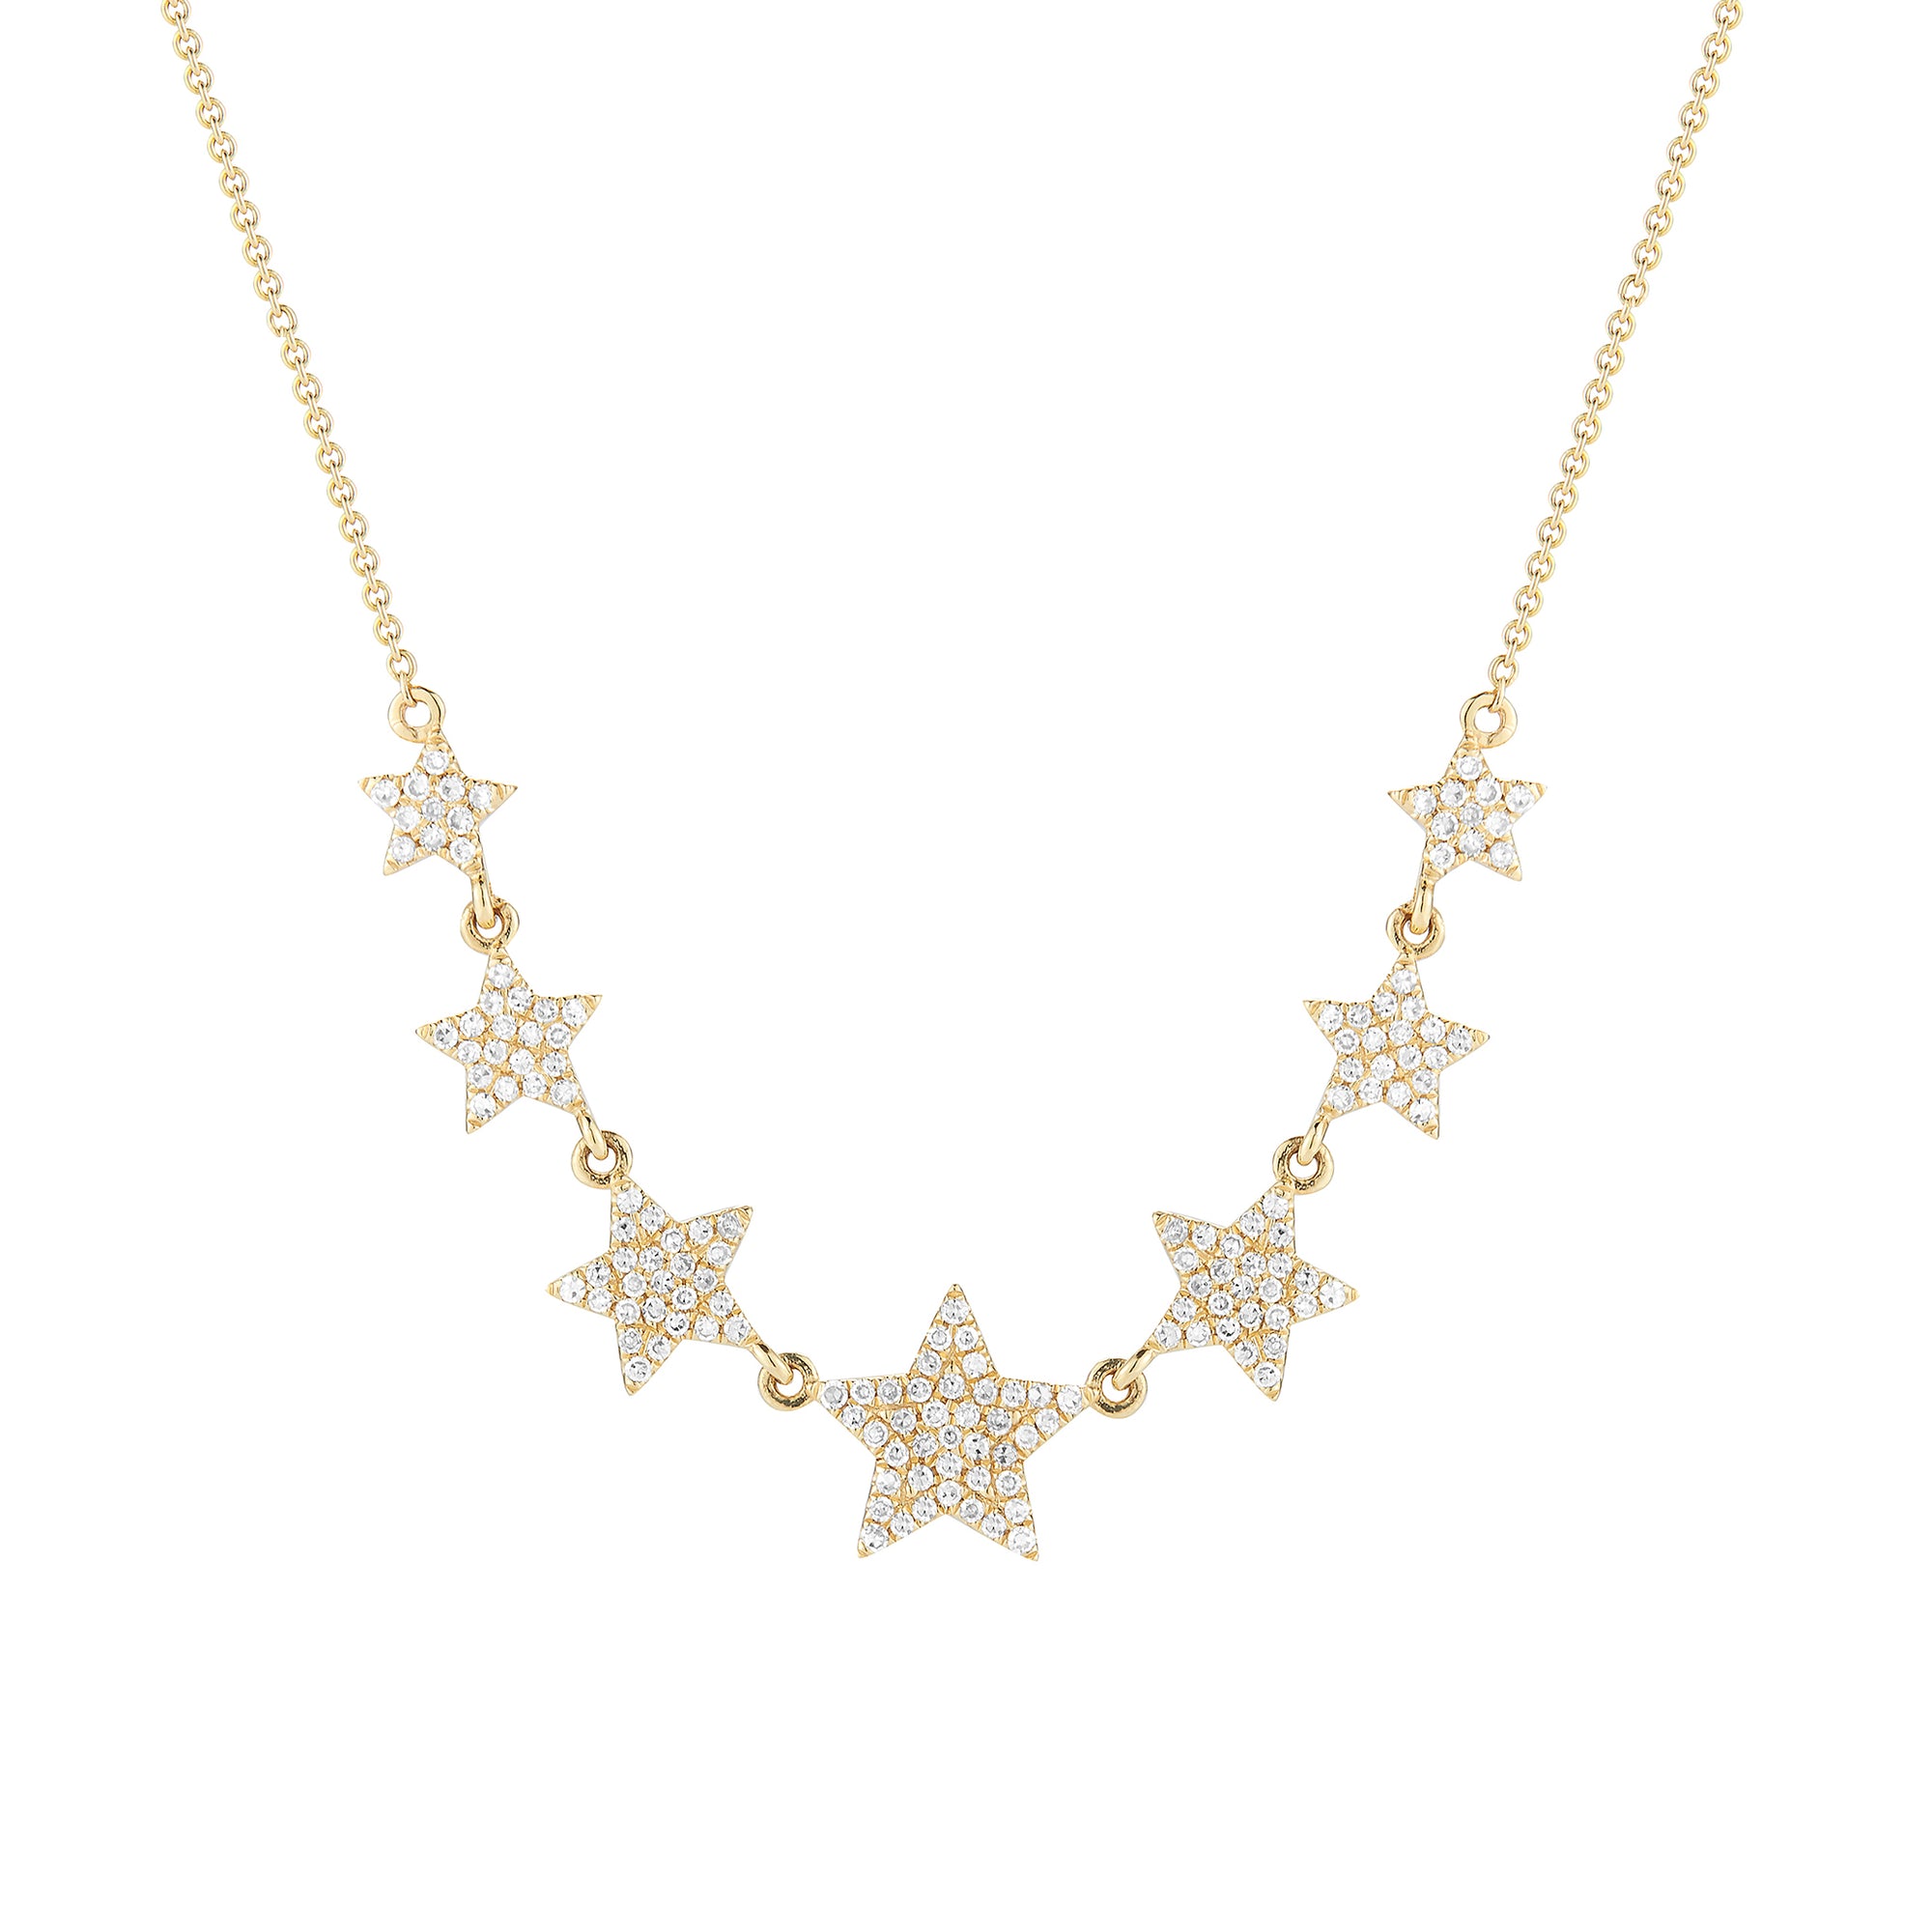 Diamond Graduated Star Necklace  -14K gold weighing 3.21 grams  -153 round pave-set diamonds totaling 0.37 carats.